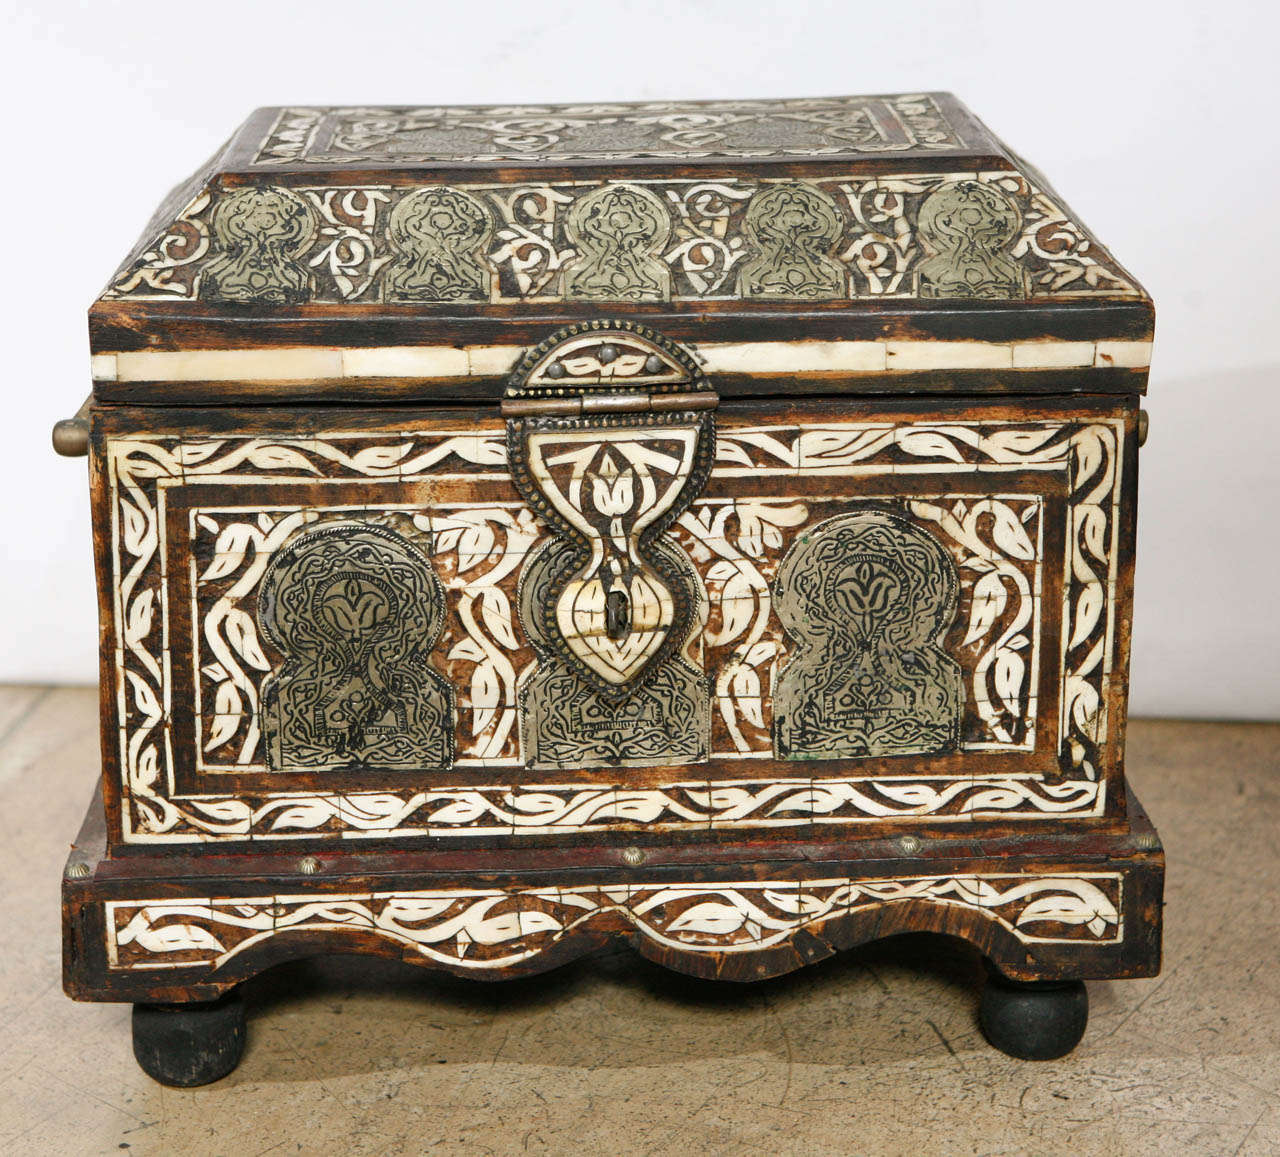 A early 20th century bone inlaid Moroccan box. Also decorated with brass plaques on sides and top with an abstract Islamic design. Ball feet.